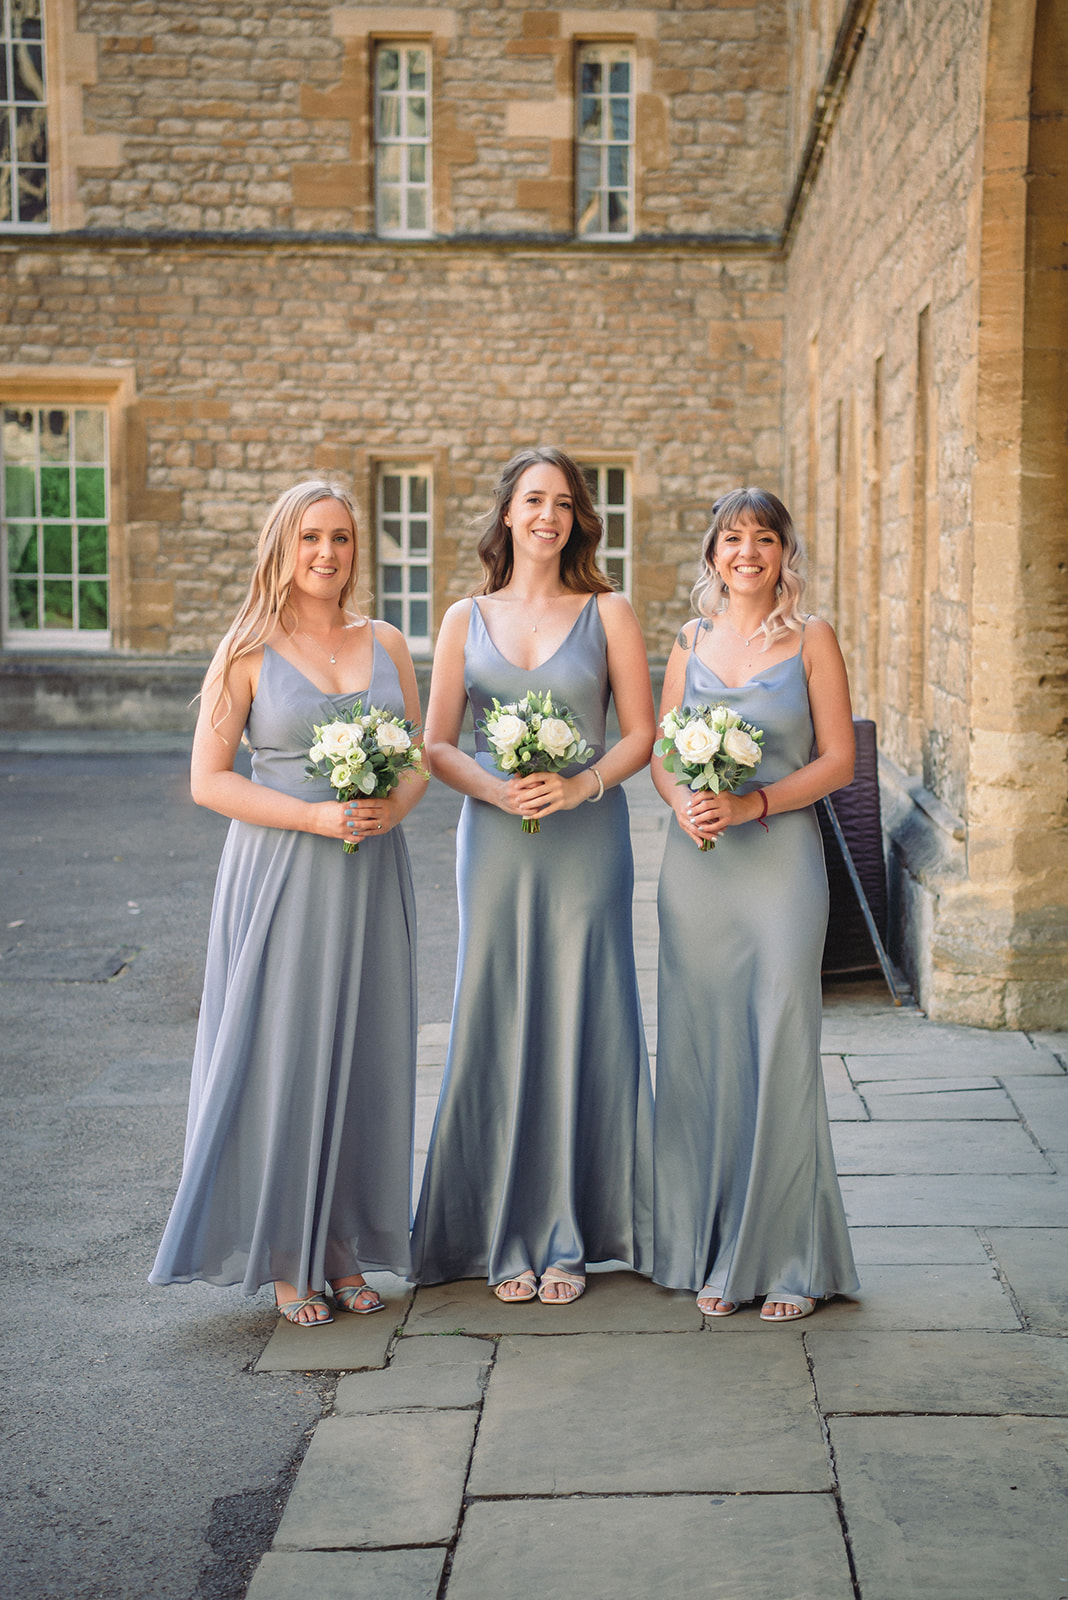 Beautiful portrait of the bride's maids at New College Chapel